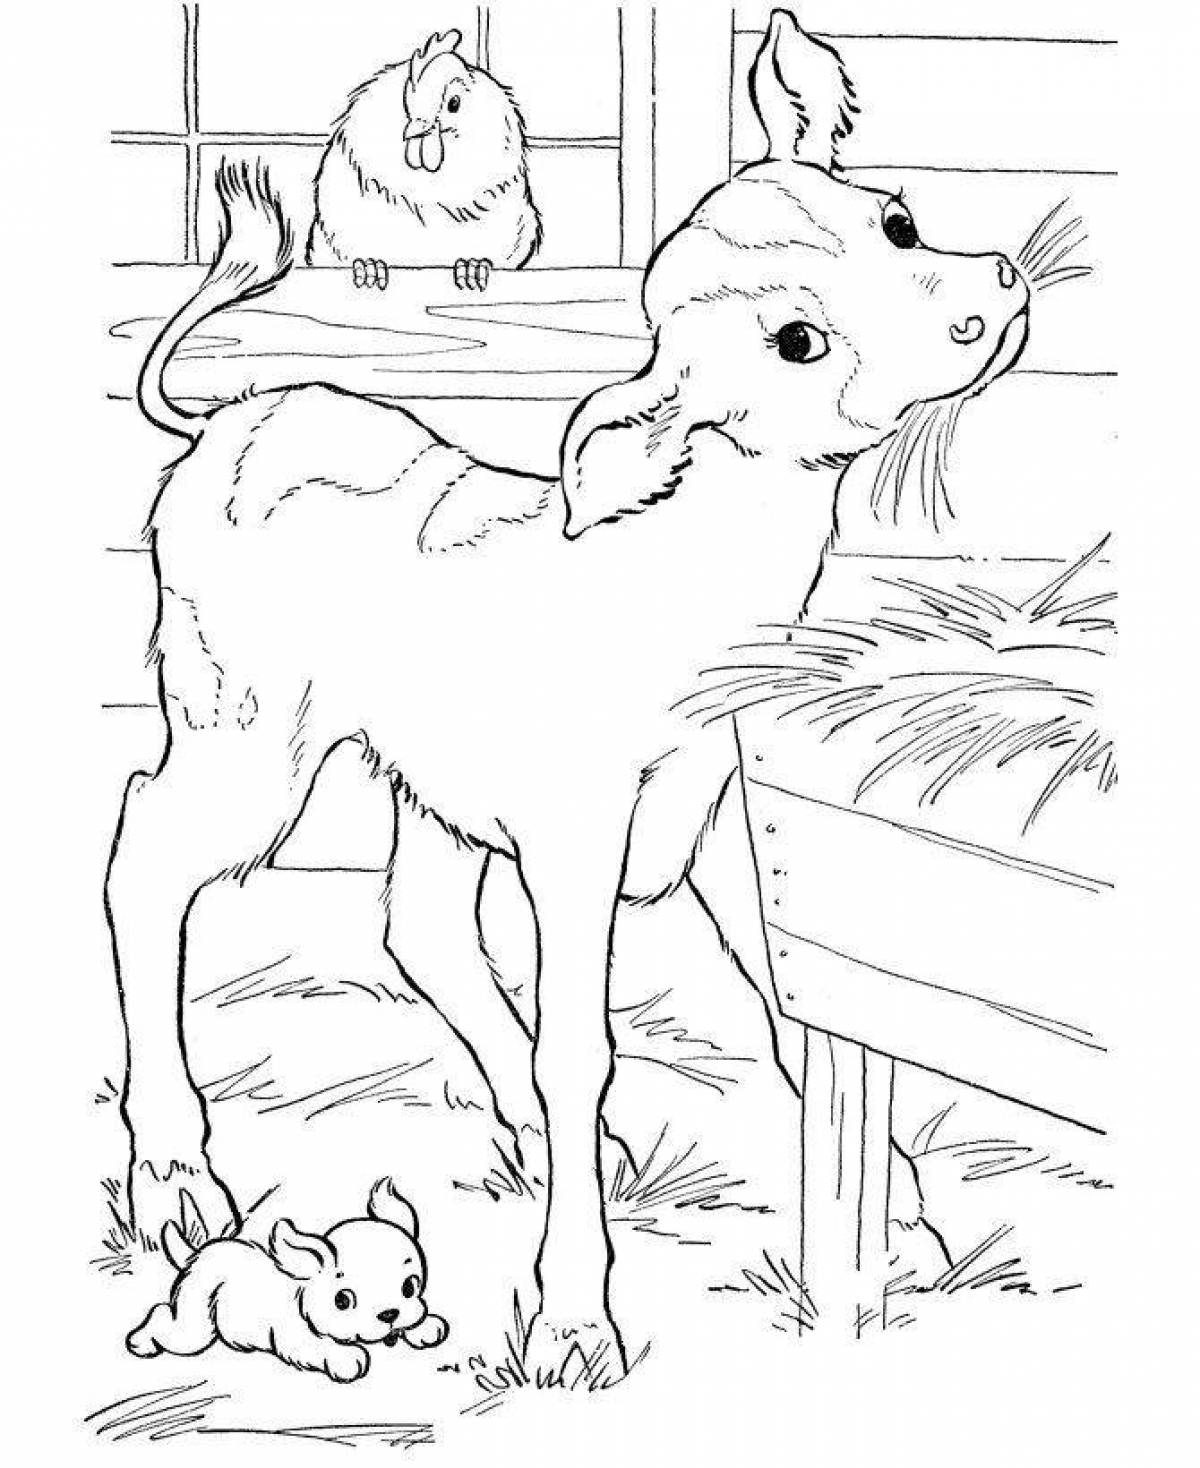 Courtesy pet coloring pages for 5-6 year olds